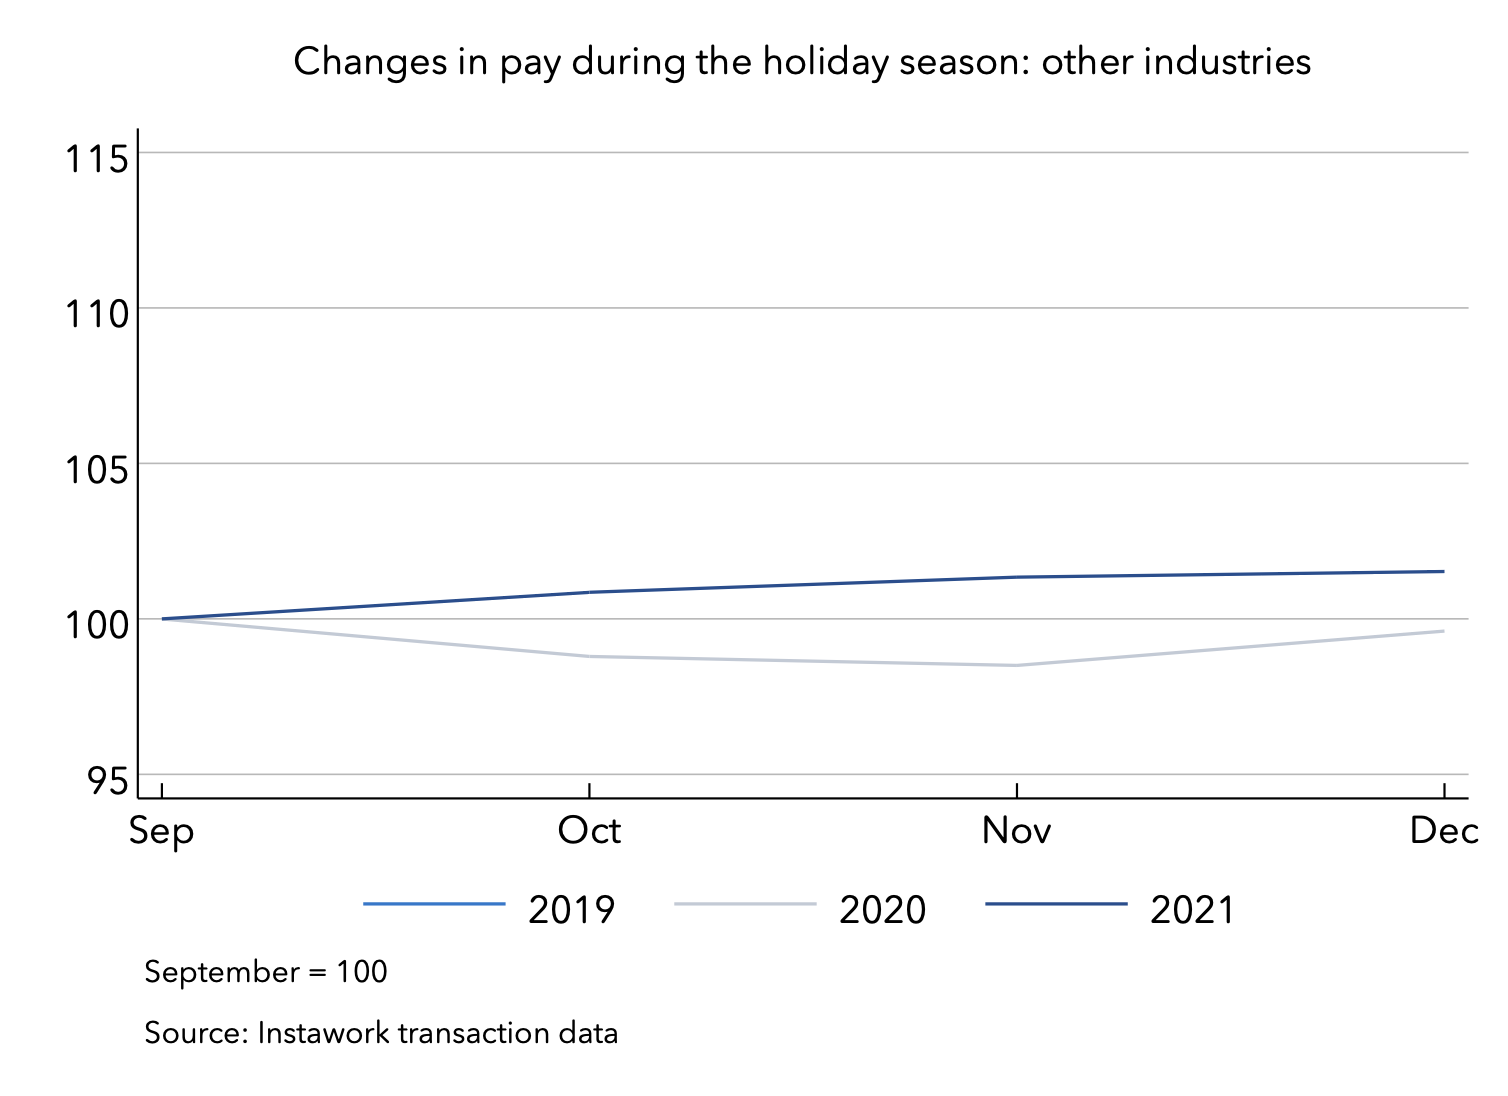 22 Sep 2022 holiday pay other